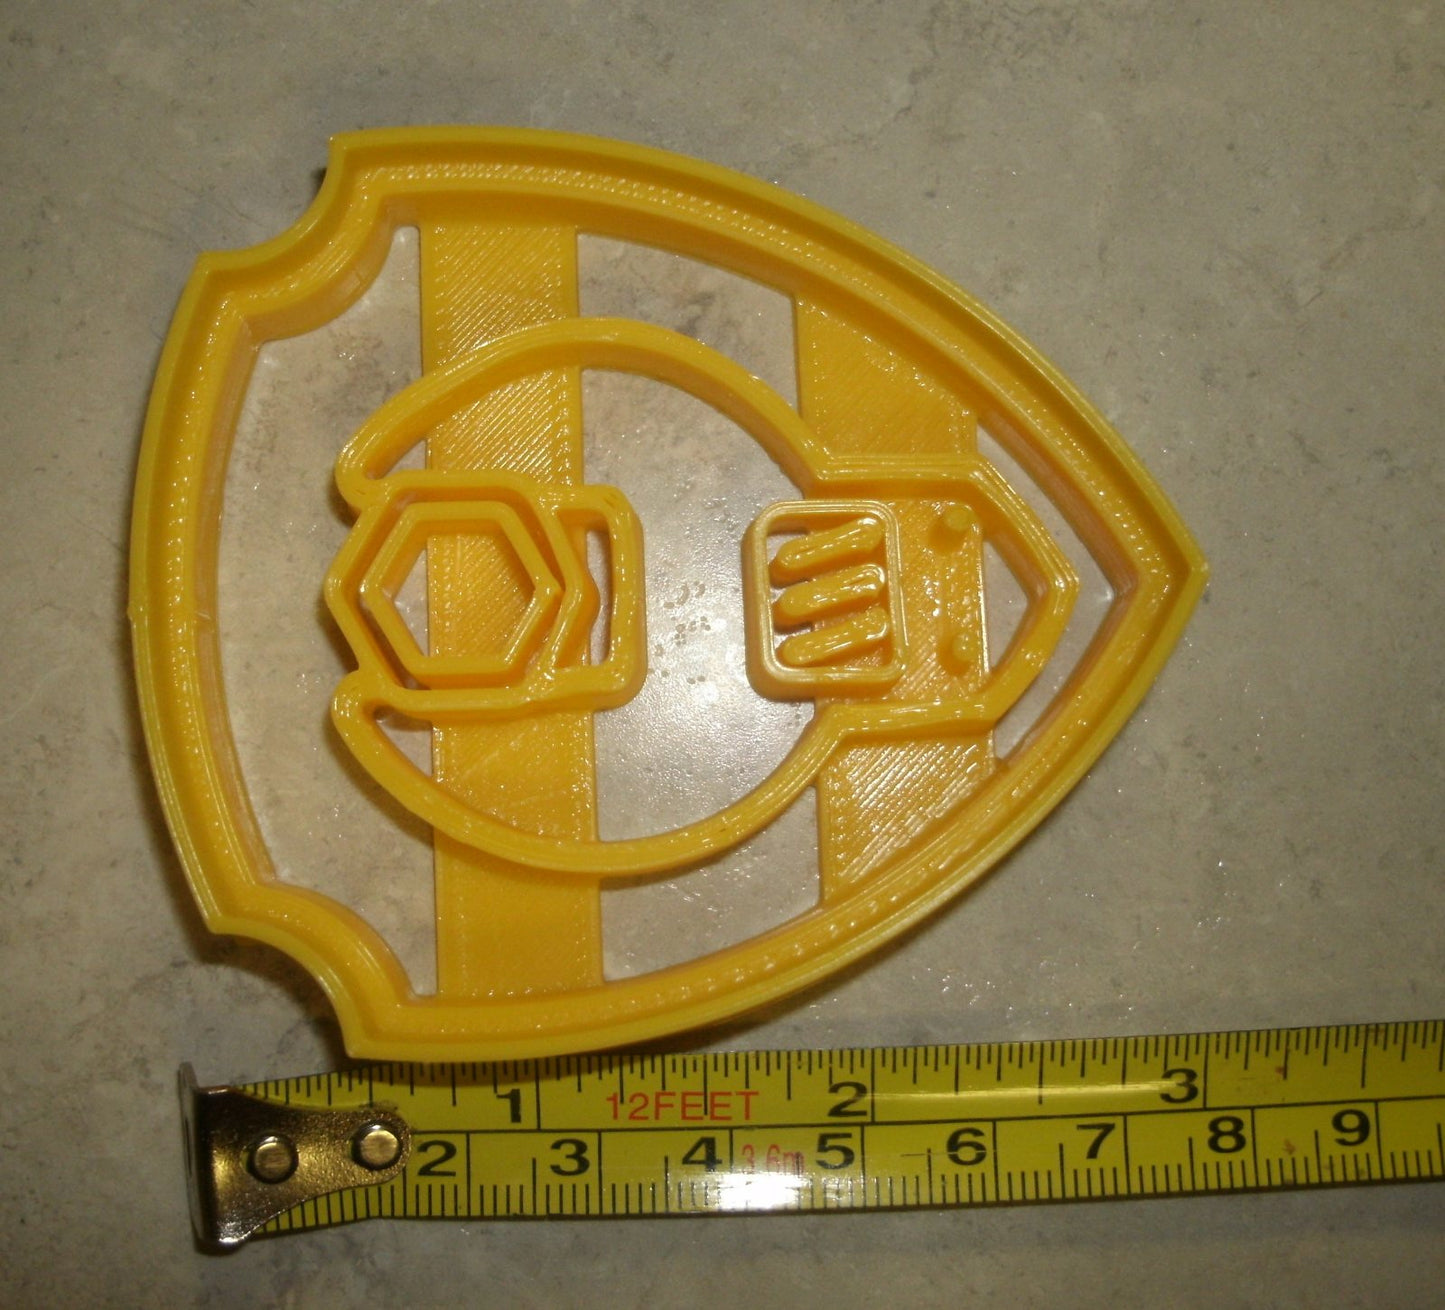 Rubble Shield Tag Logo from Paw Patrol Kids TV Show Cookie Cutter USA PR804